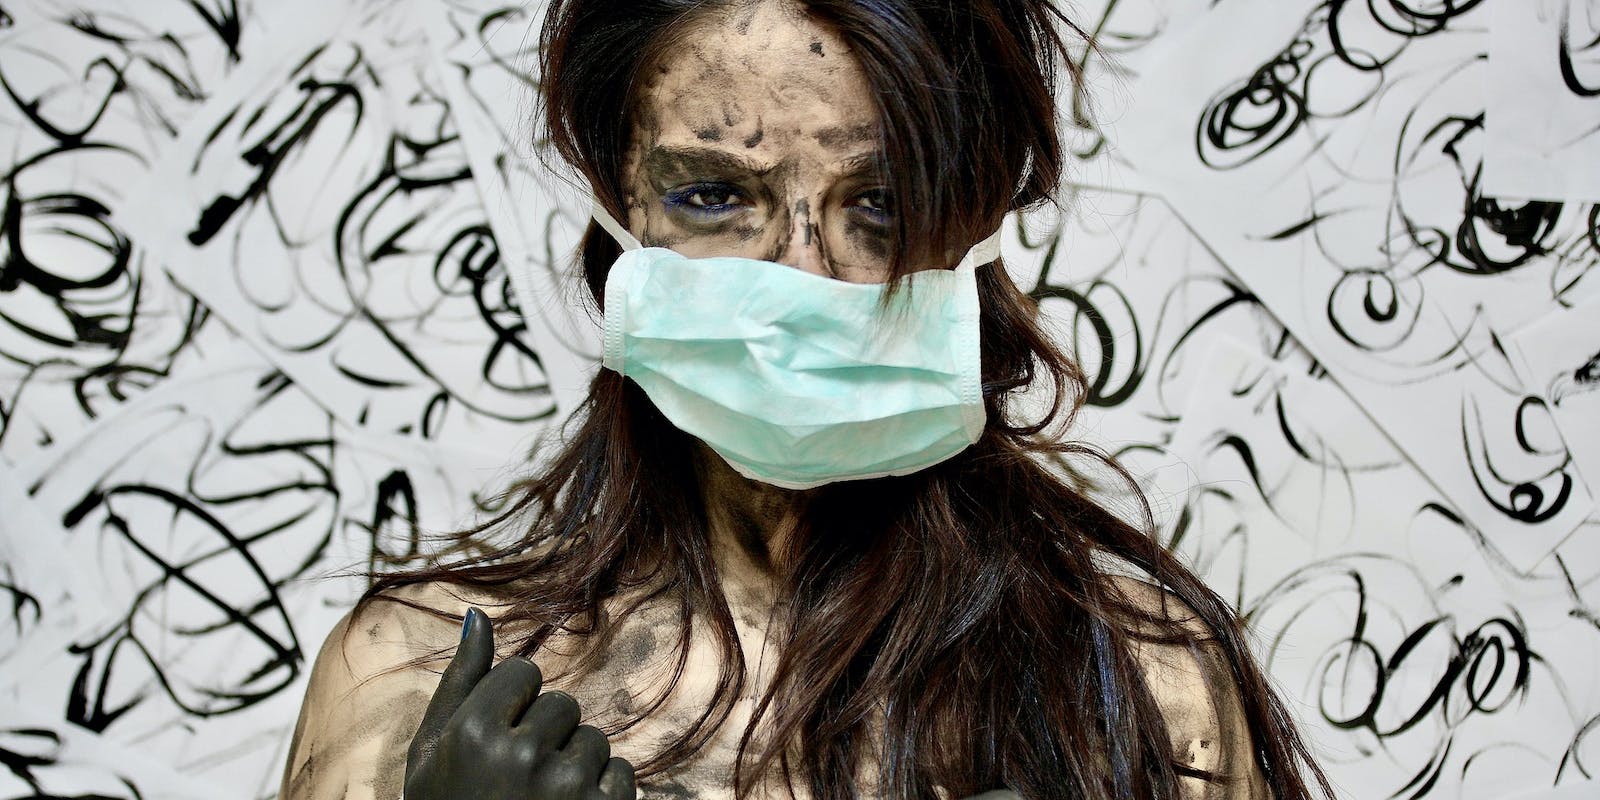 A masked, exhausted woman covered in mud stares intensely at the camera against a backdrop of muddy, artistic swirls on a white wall